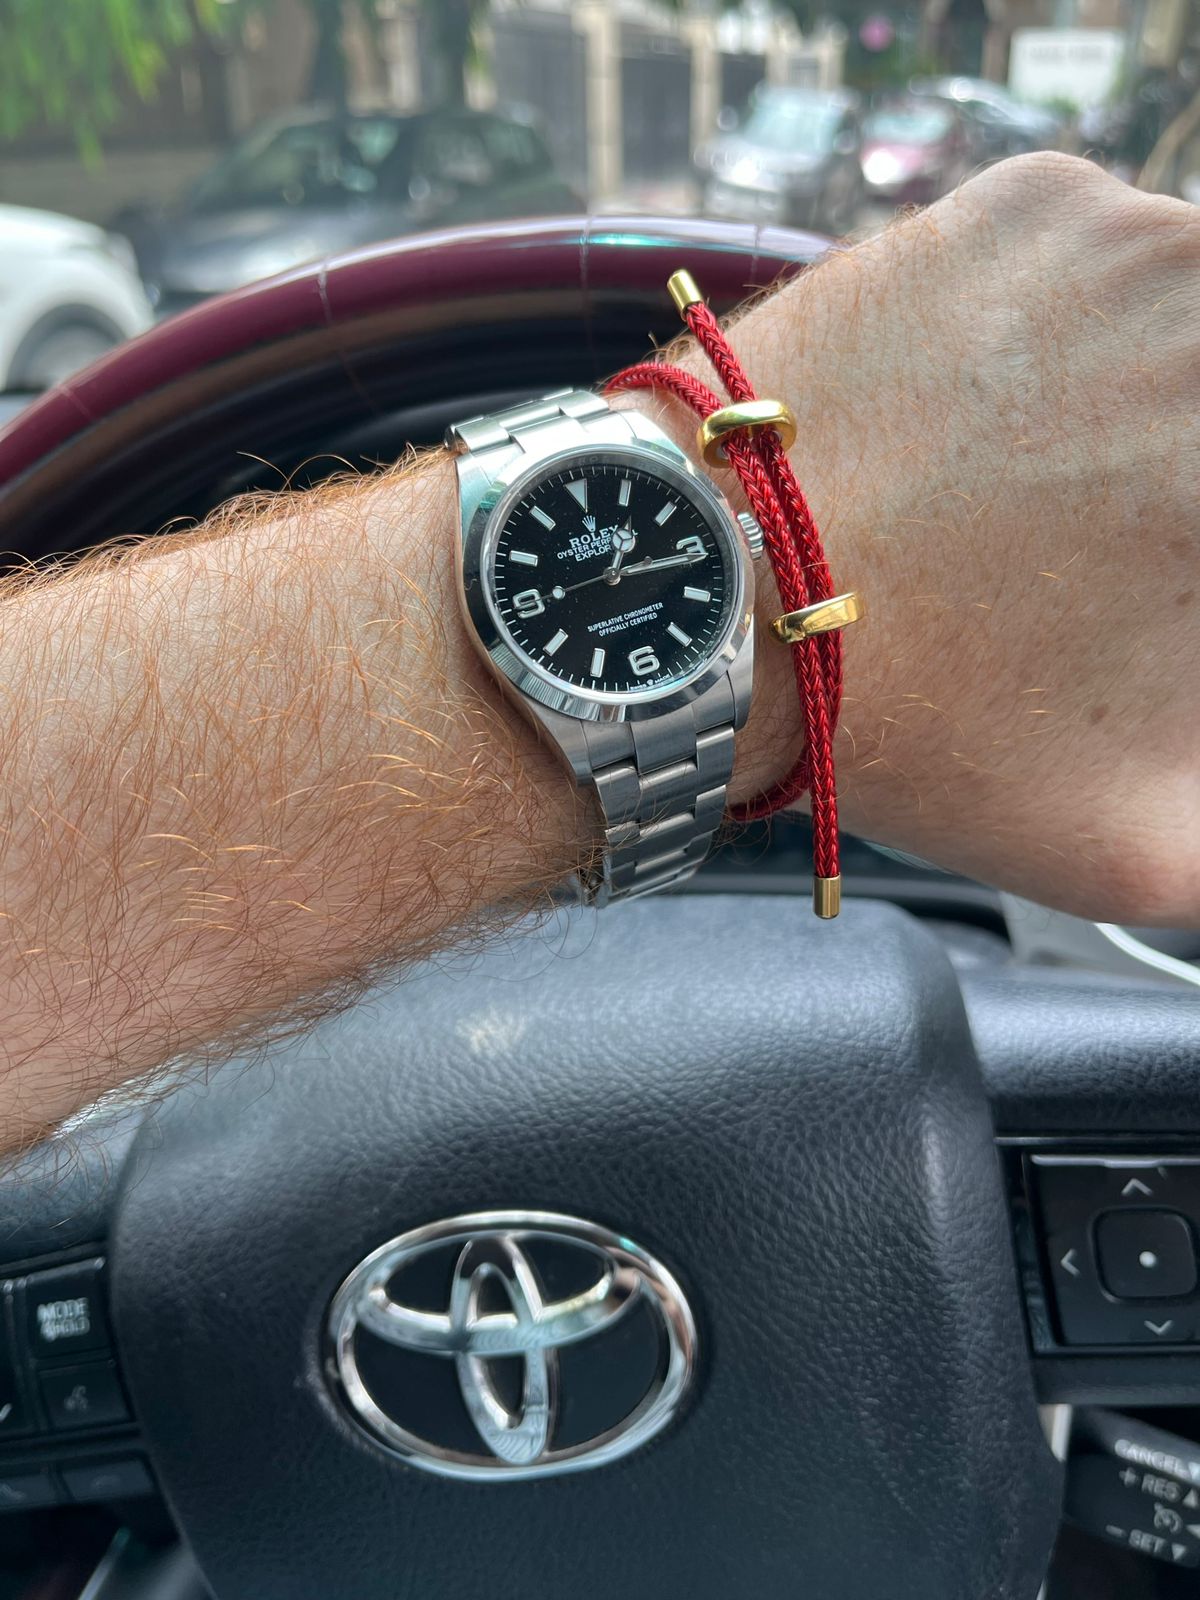 Classic Red Italian Leather Jewel in 24Kt Gold Plated Accents